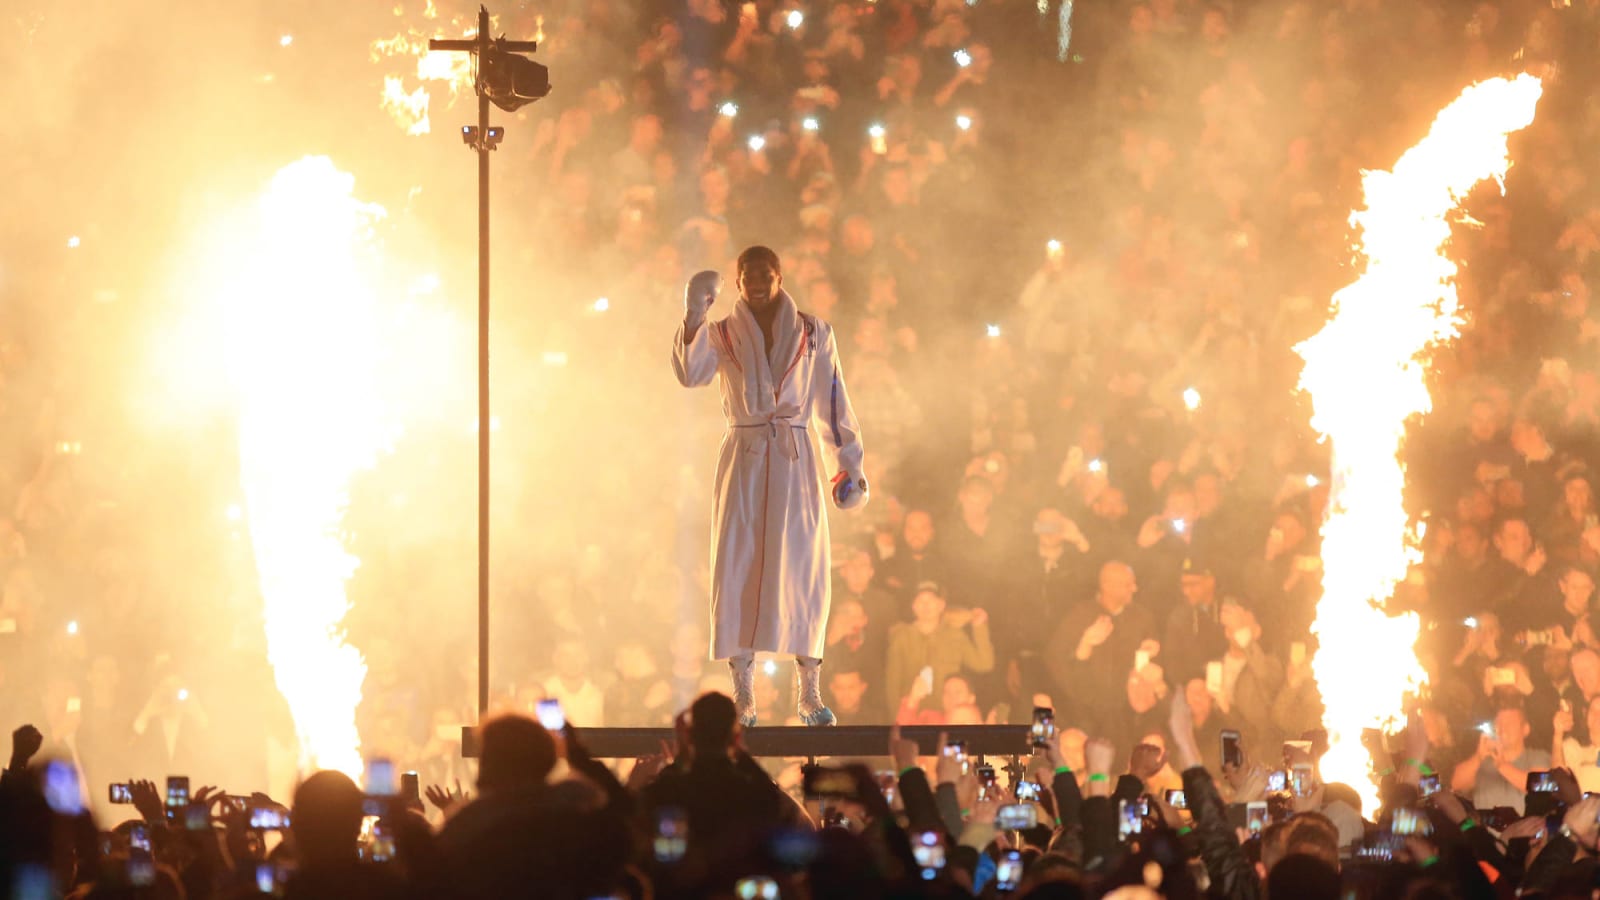 Anthony Joshua’s ring walk was a sight to behold